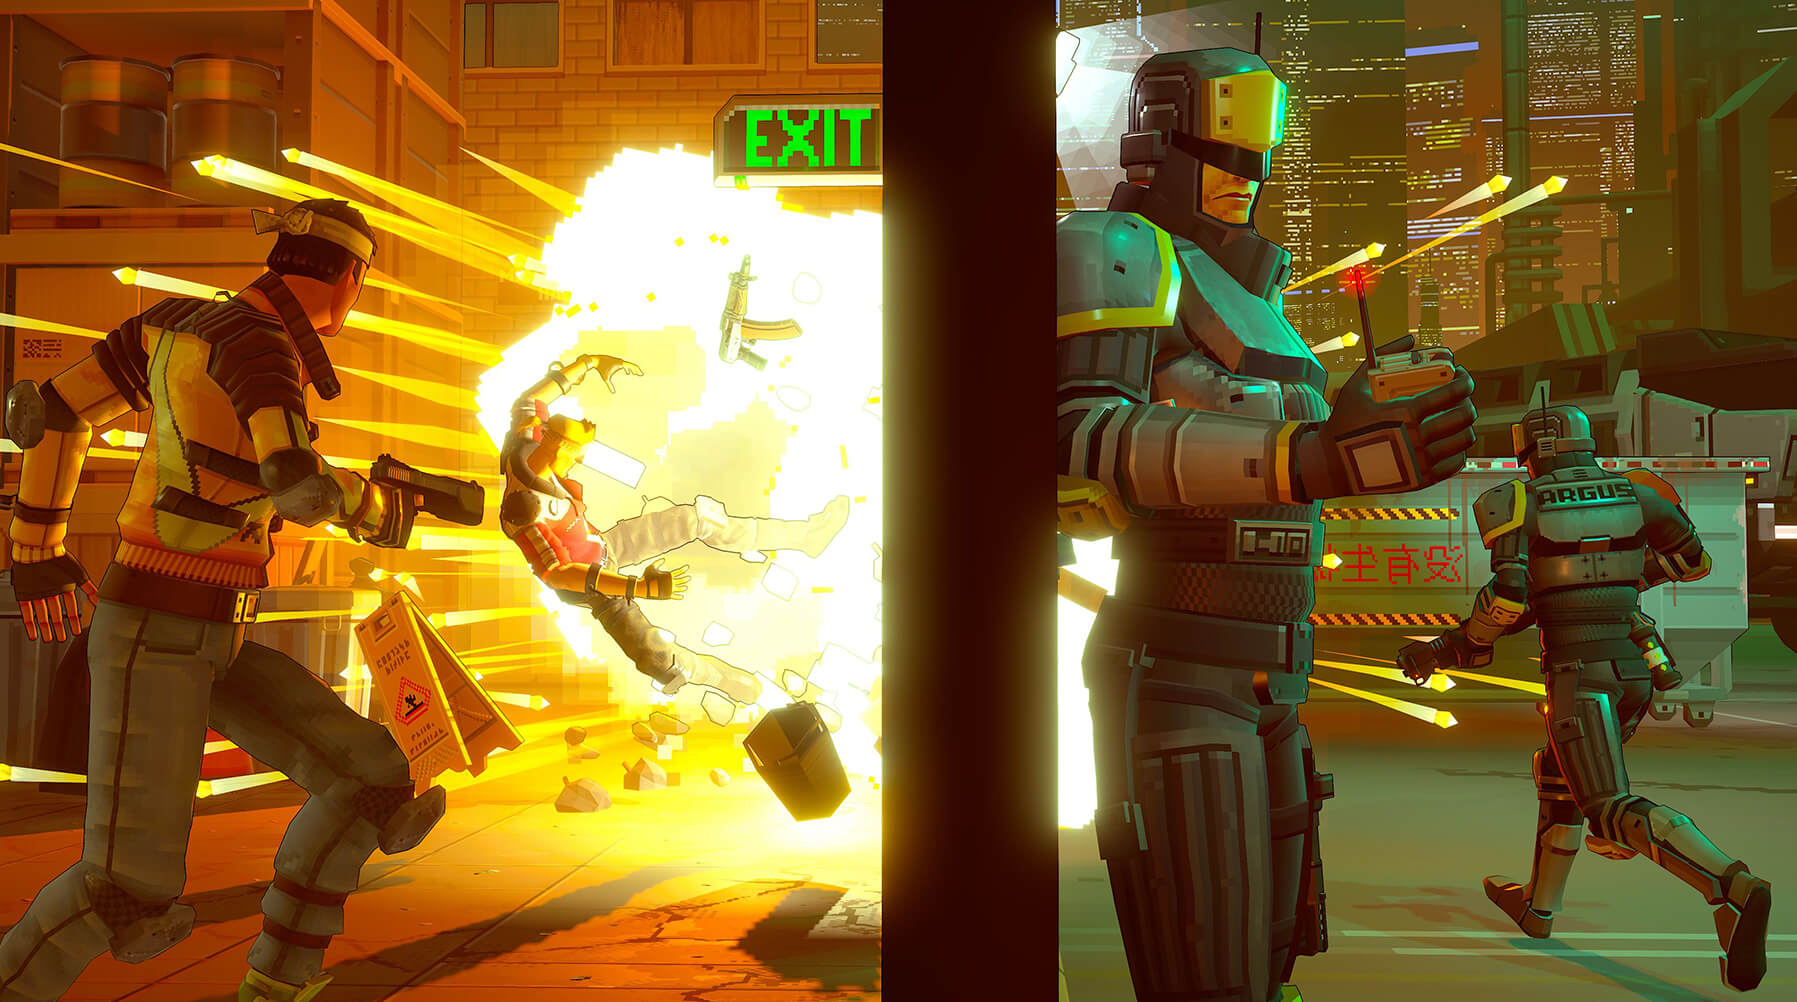 Two Enforcers from Due Process detonate a wall charge, blasting an unsuspecting Defender on the other side.